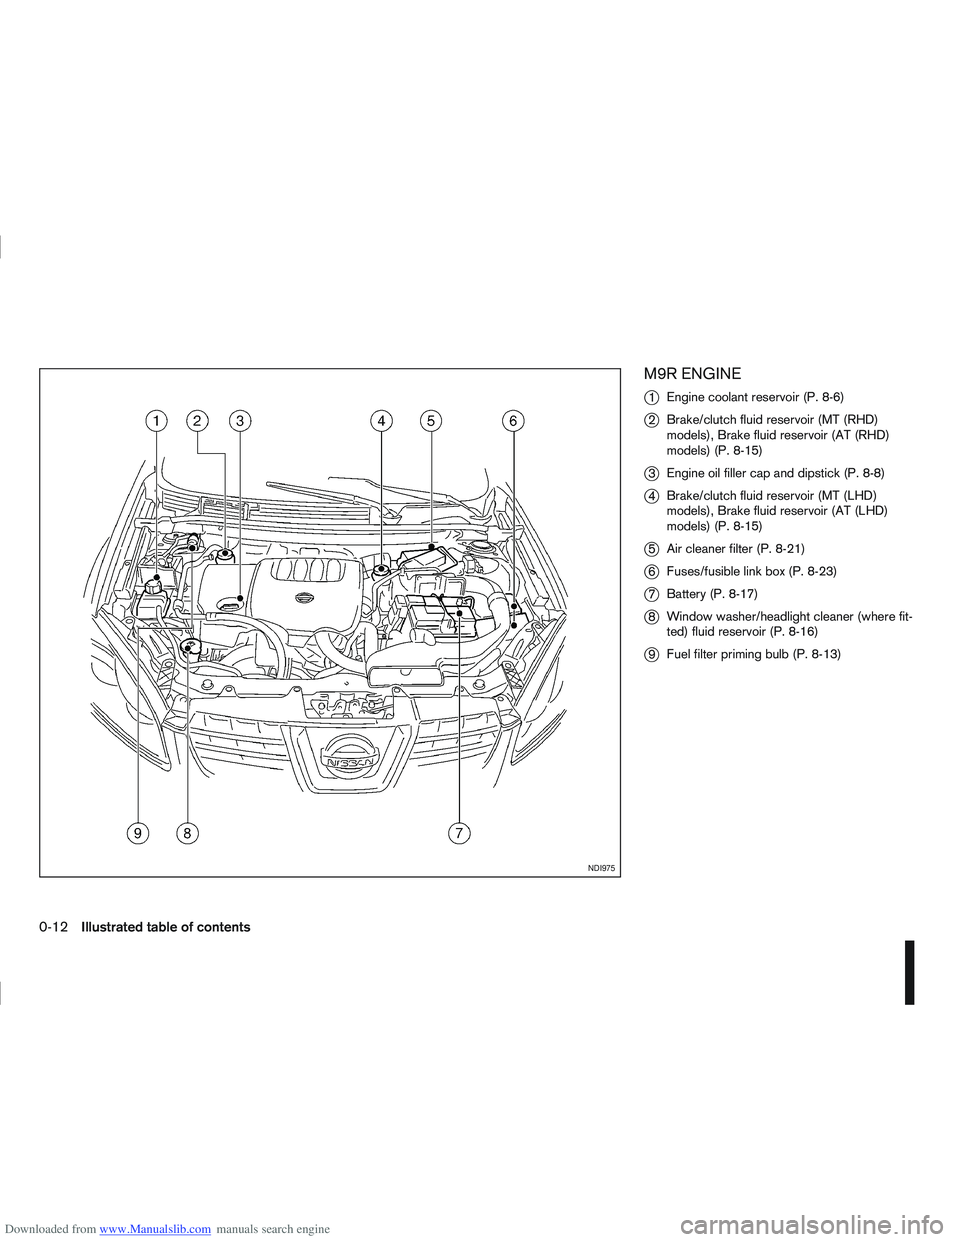 NISSAN QASHQAI 2008  Owners Manual Downloaded from www.Manualslib.com manuals search engine M9R ENGINE
j
1Engine coolant reservoir (P. 8-6)
j2Brake/clutch fluid reservoir (MT (RHD)
models), Brake fluid reservoir (AT (RHD)
models) (P. 8